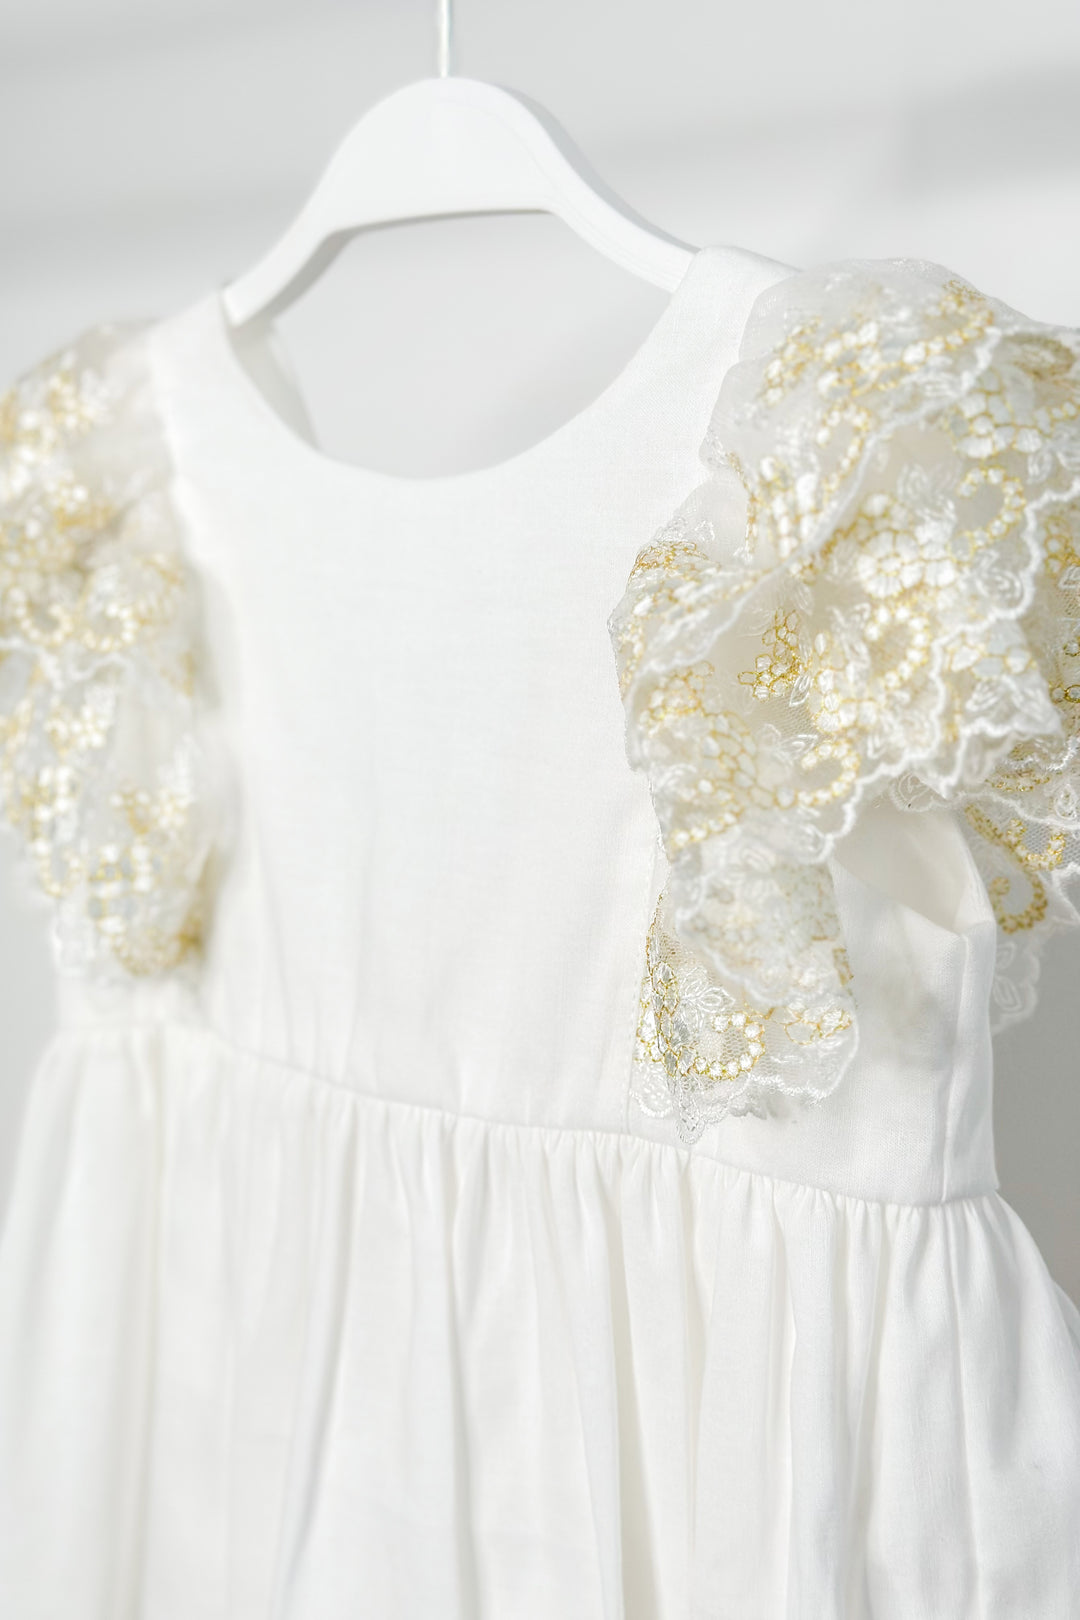 Fofettes "Haven" Ivory Gold Lace Sleeve Dress | Millie and John